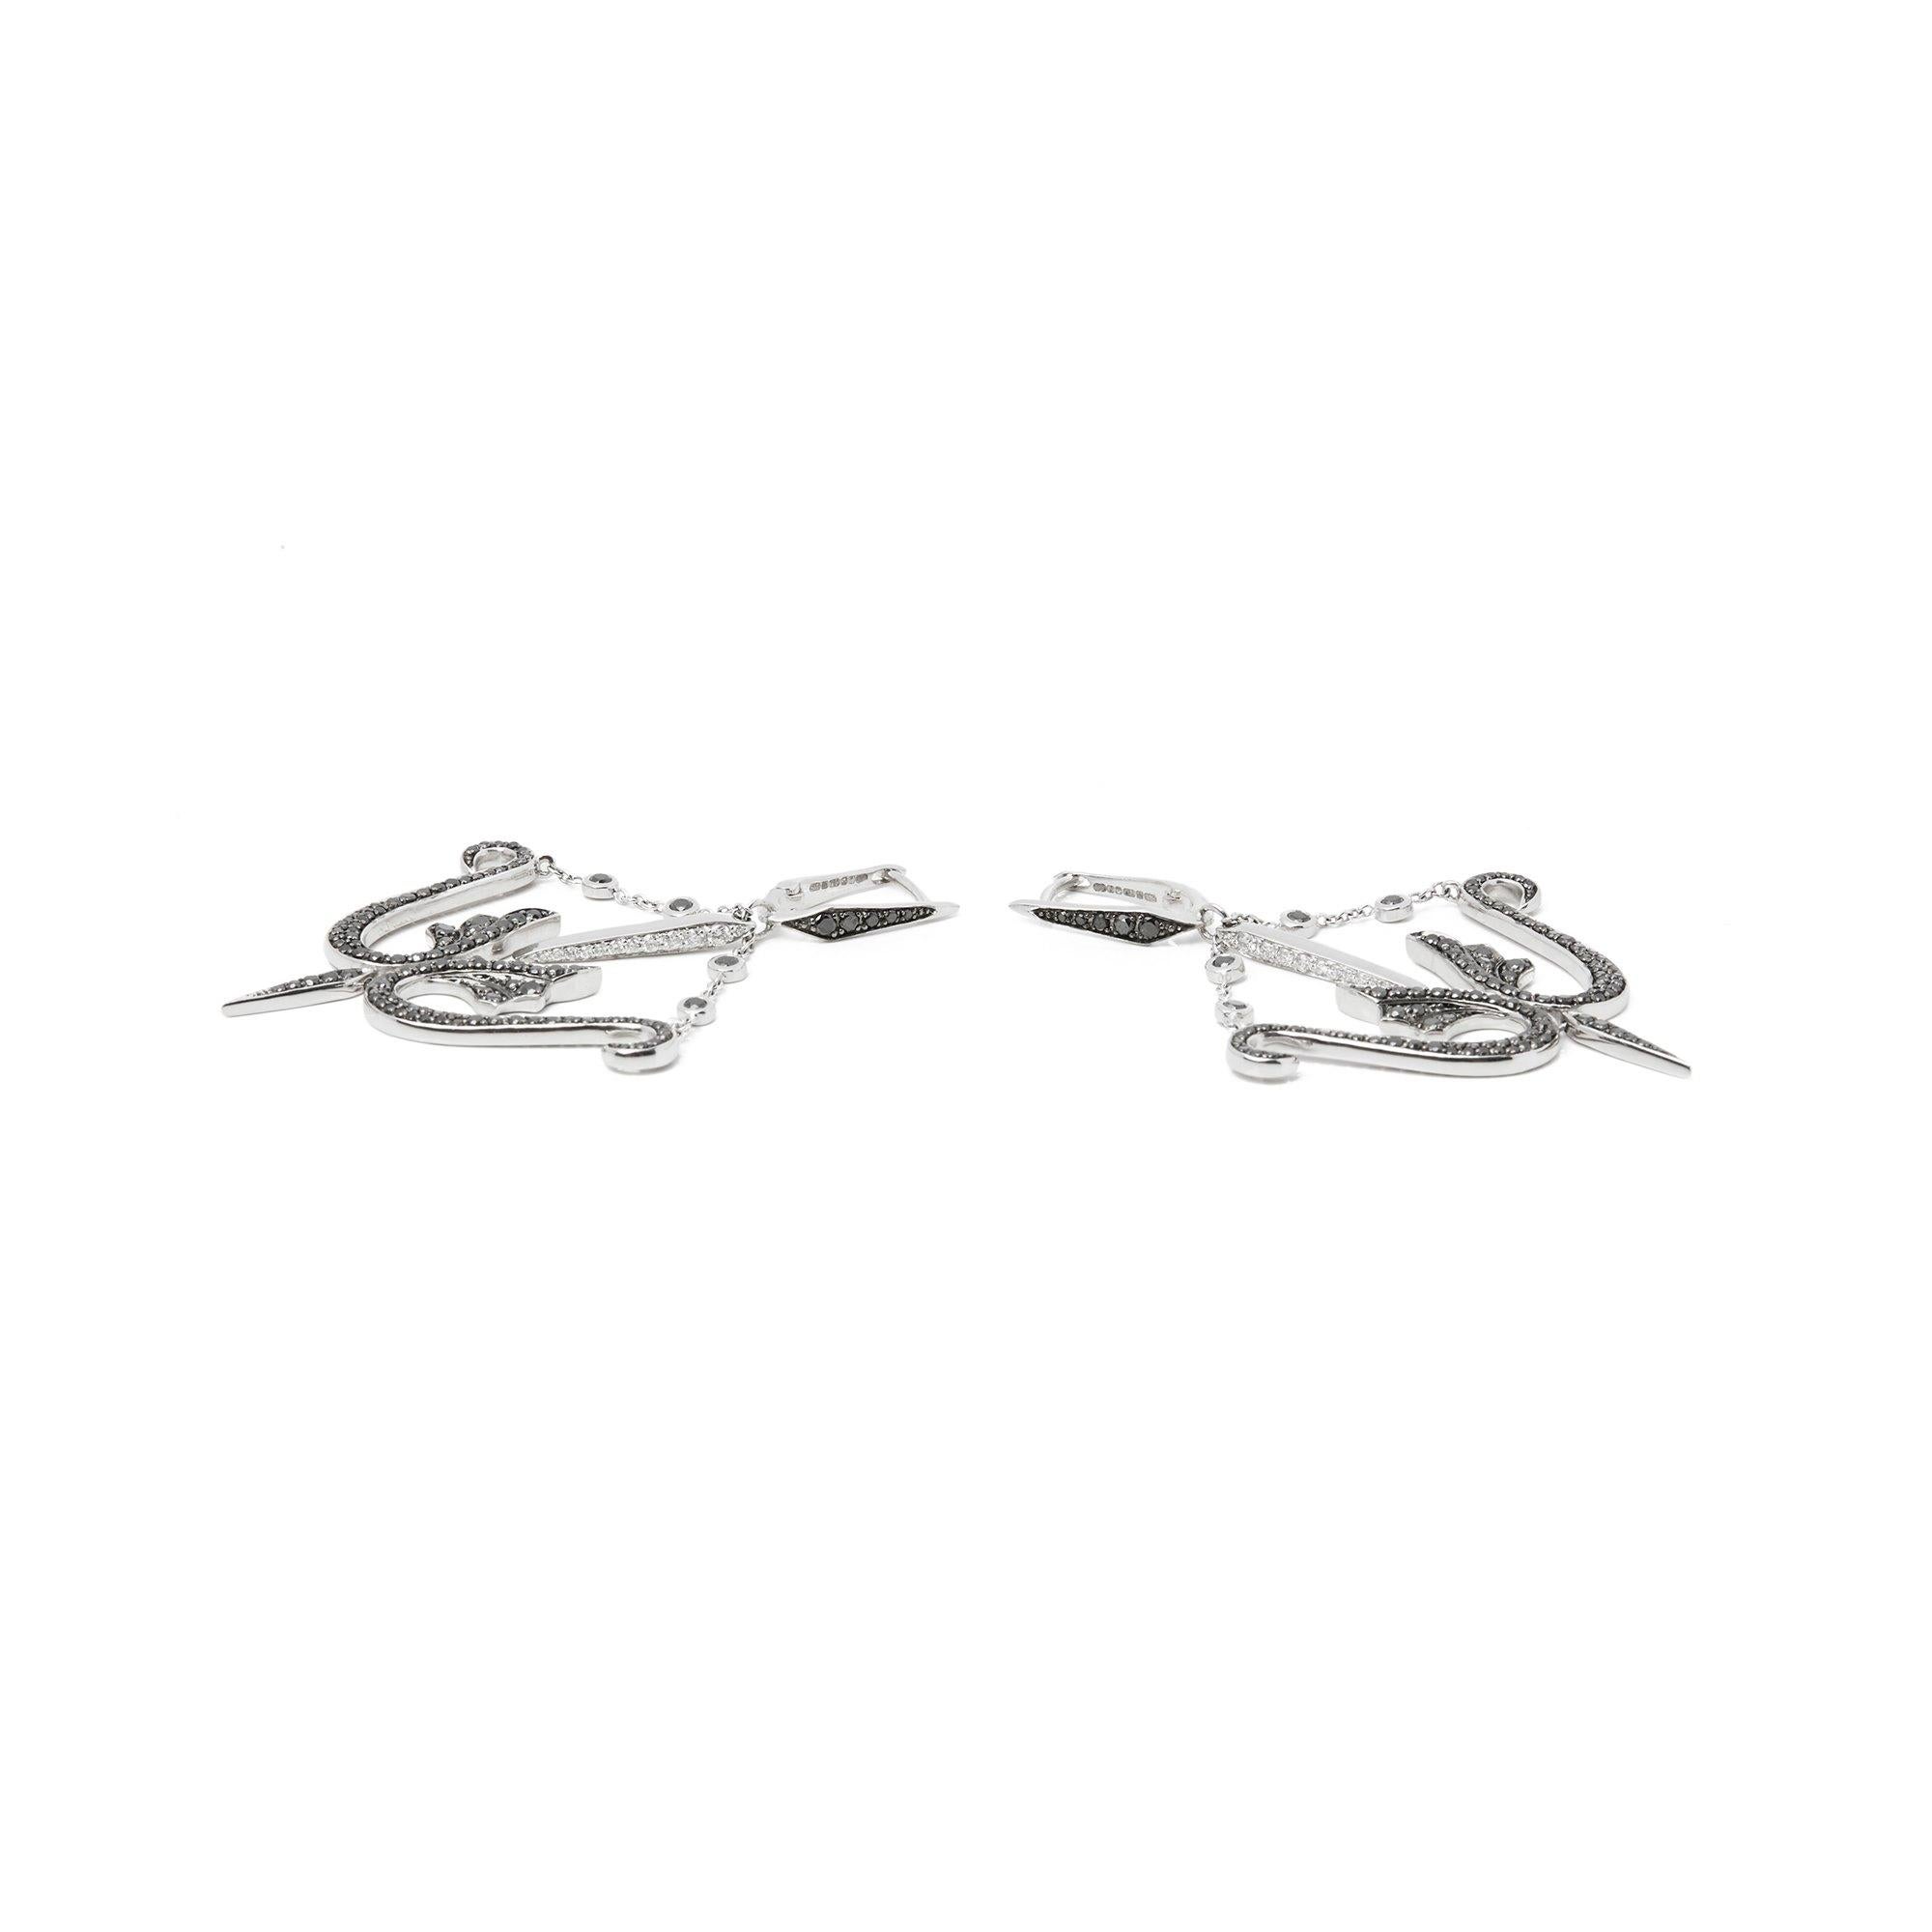 These earrings by Stephen Webster are from his Jewels Verne collection and feature pave set black and white diamonds. Set in 18k white gold and with a leverback fitting. 